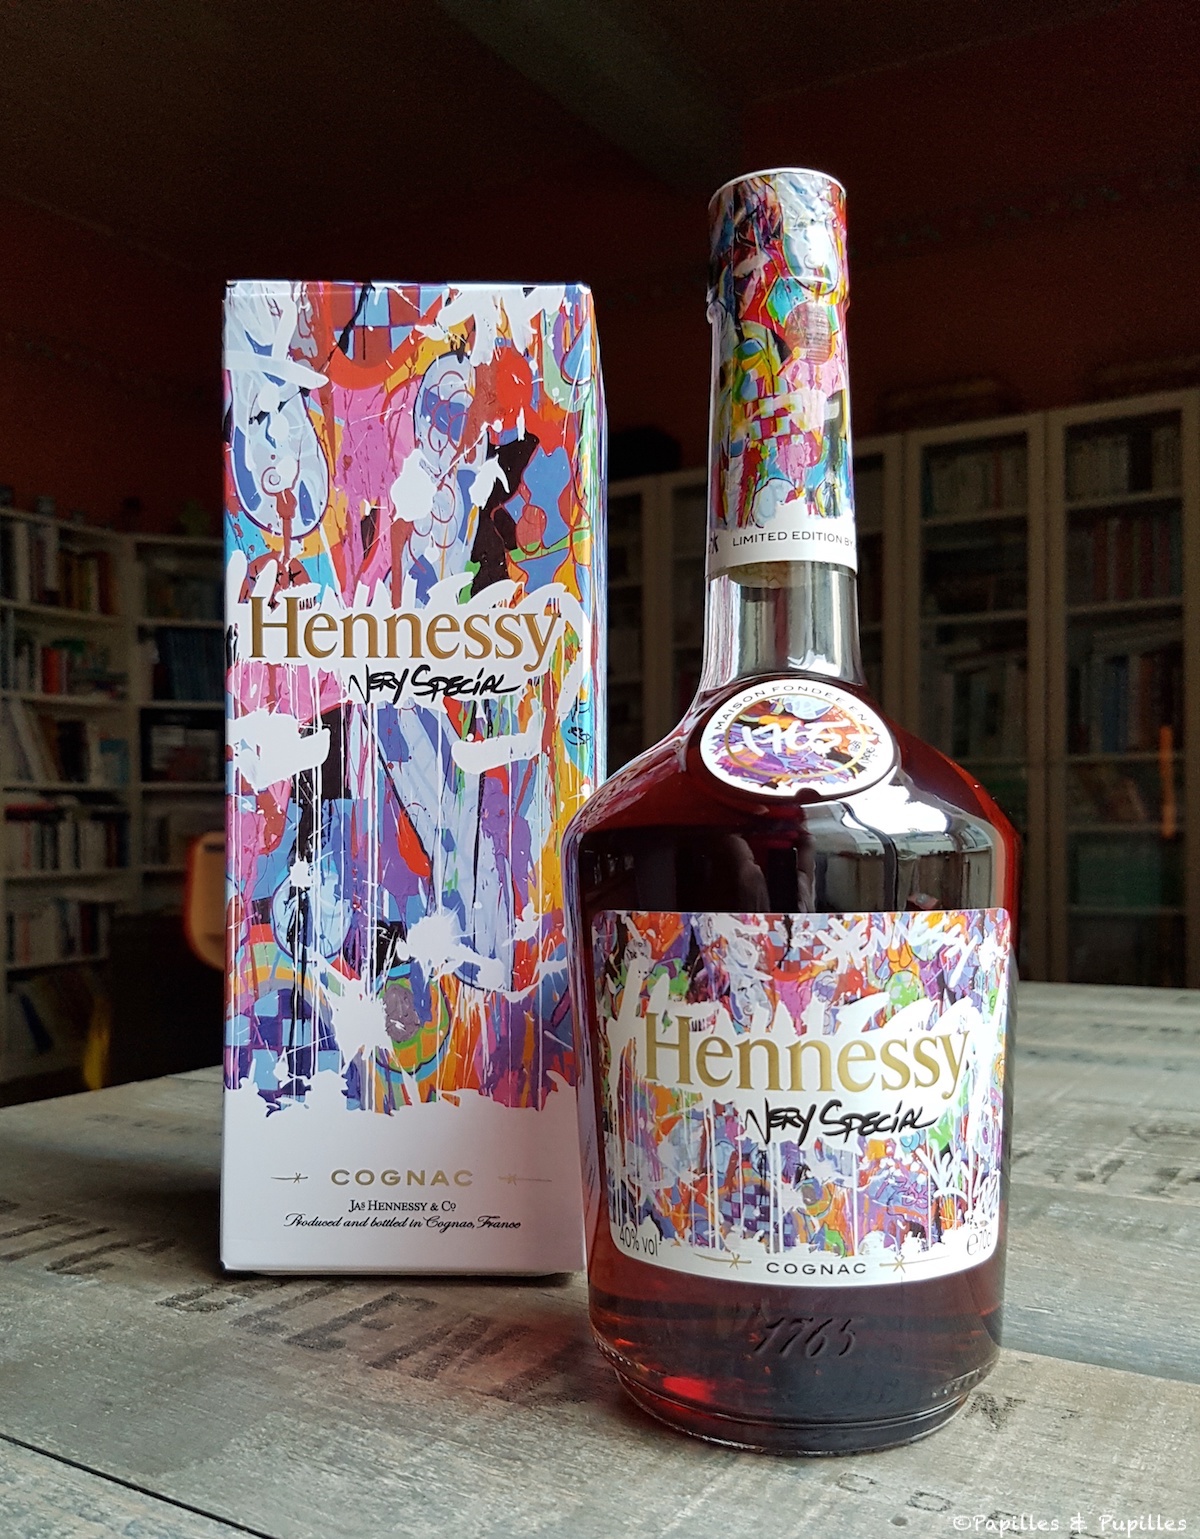 Buy Éditions limitées Hennessy France